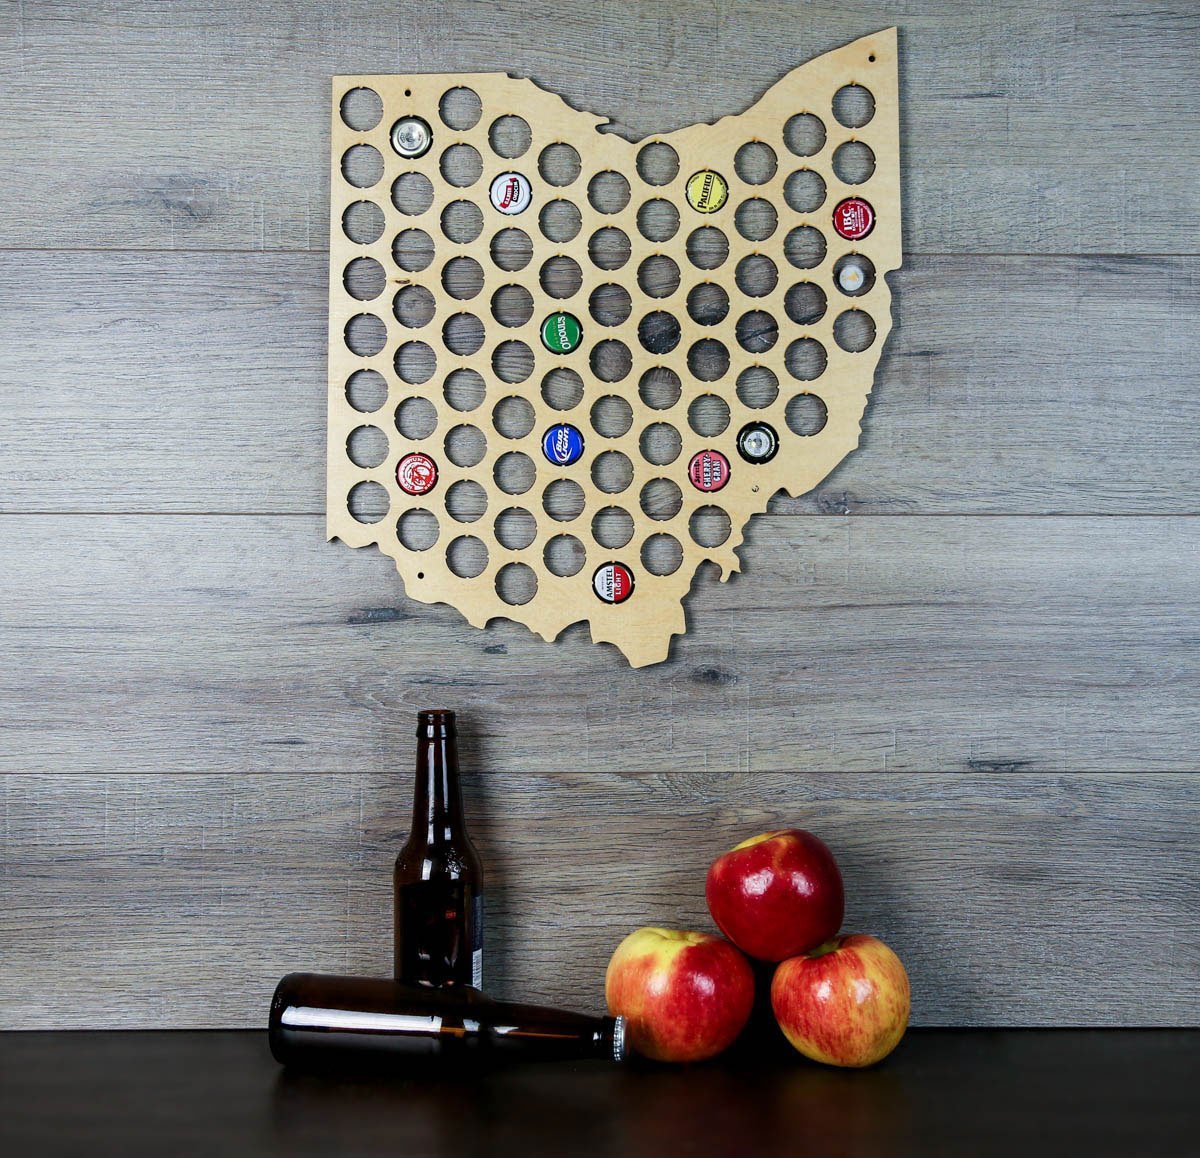 Torched Products Beer Bottle Cap Holder Ohio Beer Cap Map (777576317045)